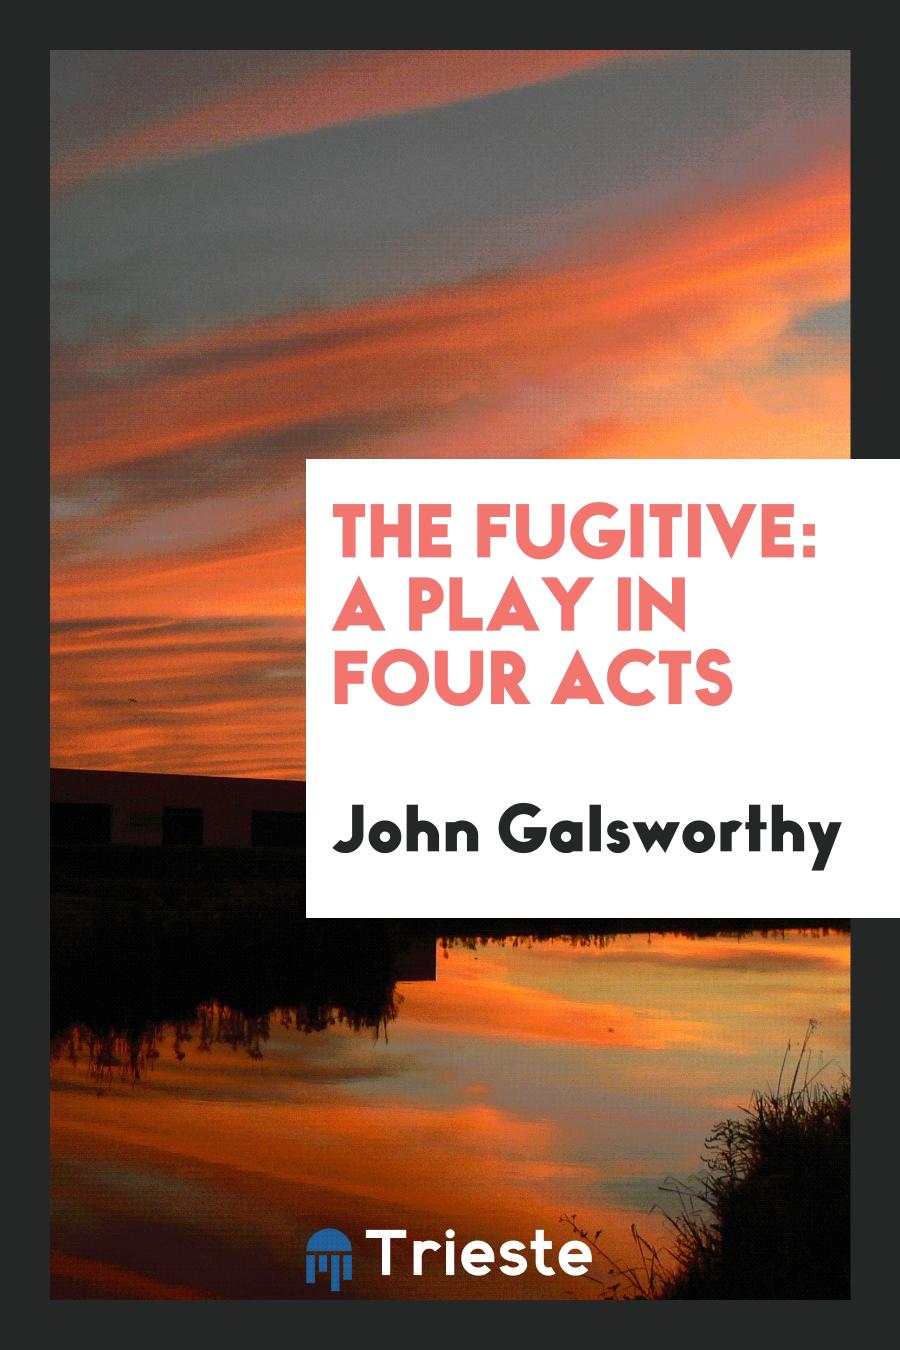 The Fugitive: A Play in Four Acts